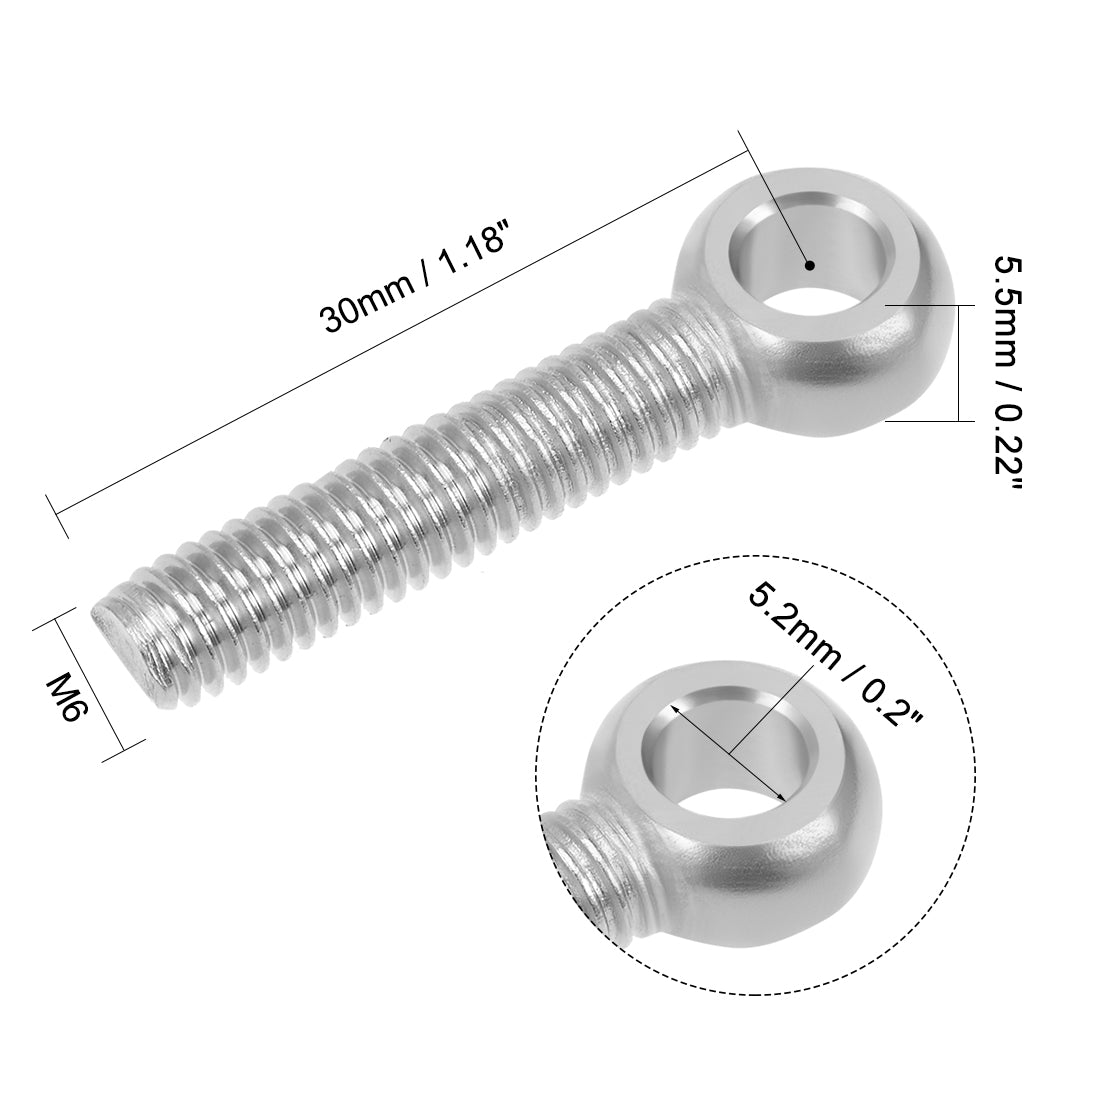 uxcell Uxcell M6 x 30mm Machinery Shoulder Swing Lifting Eye Bolt 304 Stainless Steel 5pcs